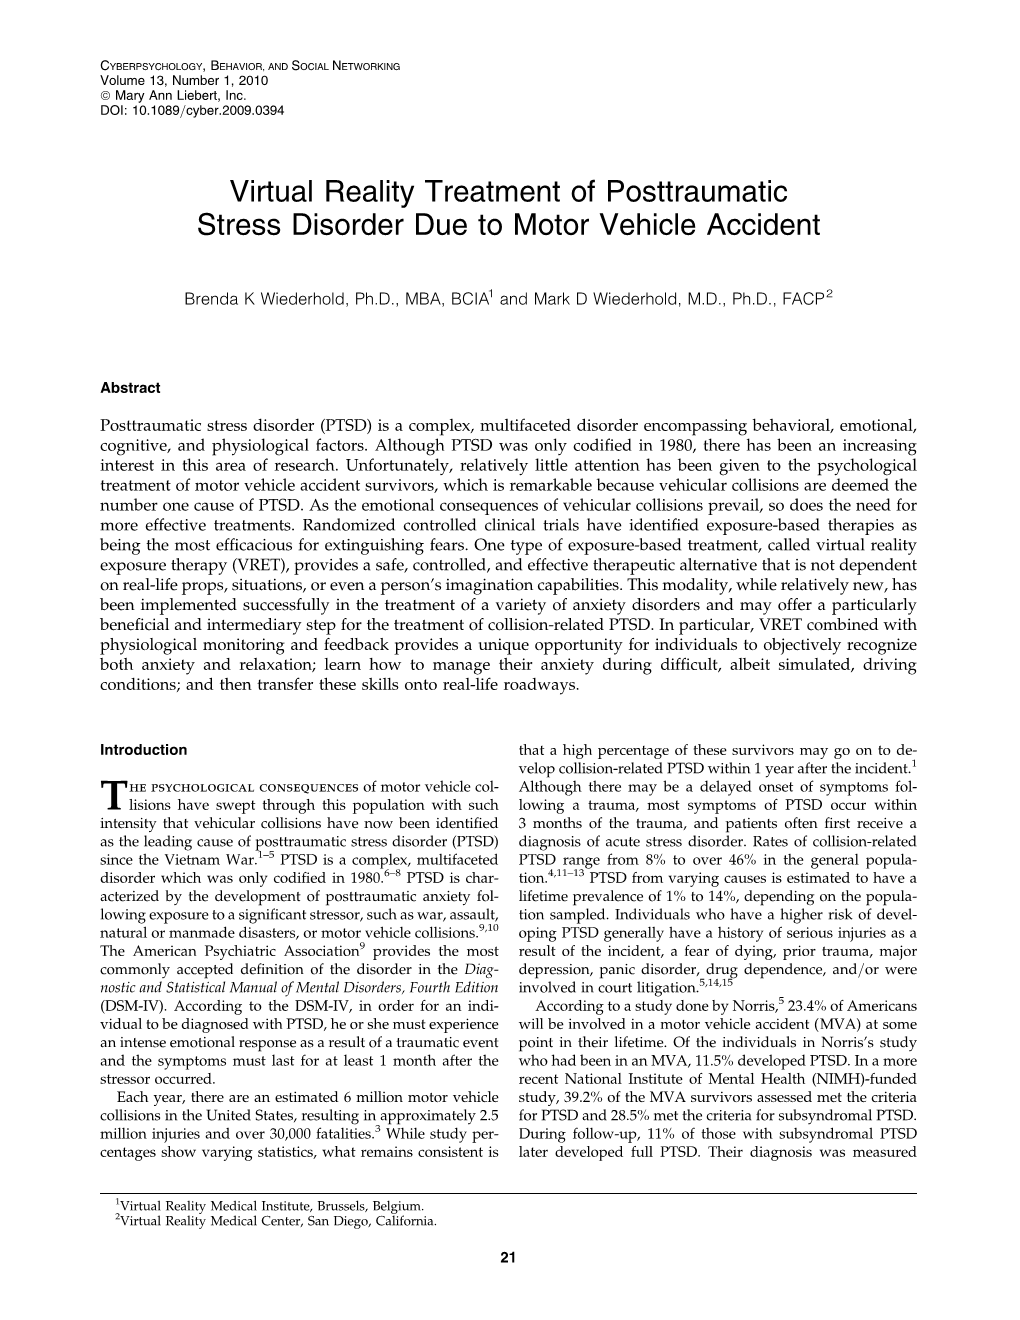 Number 1, 2010 Virtual Reality Treatment of Posttraumatic Stress